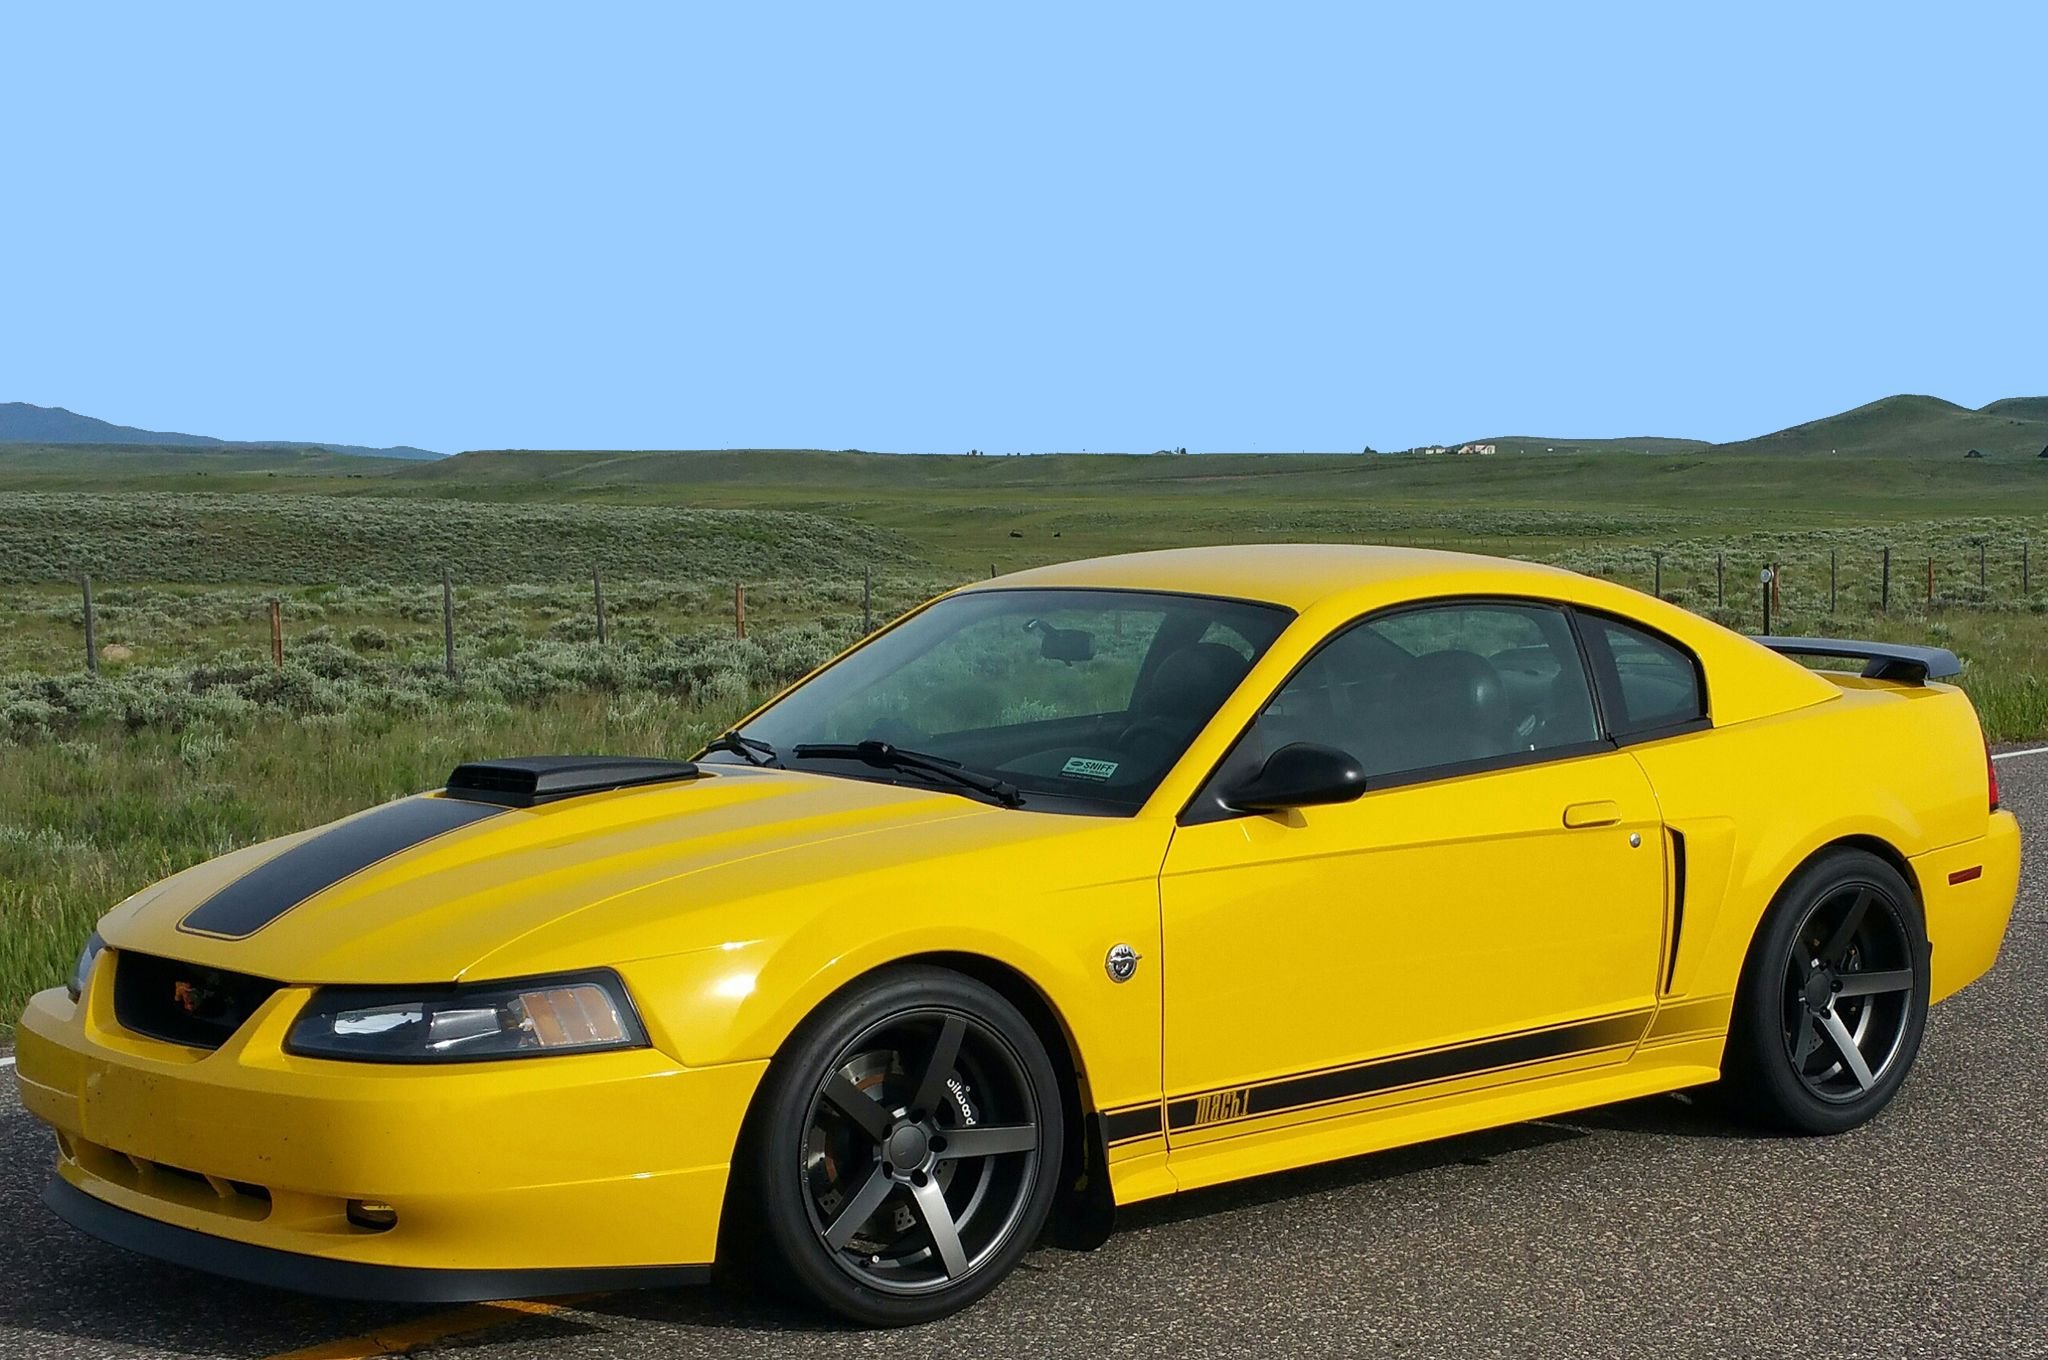 2004, Ford, Mustang, Mach, 1, Muscle, Mach 1 Wallpaper